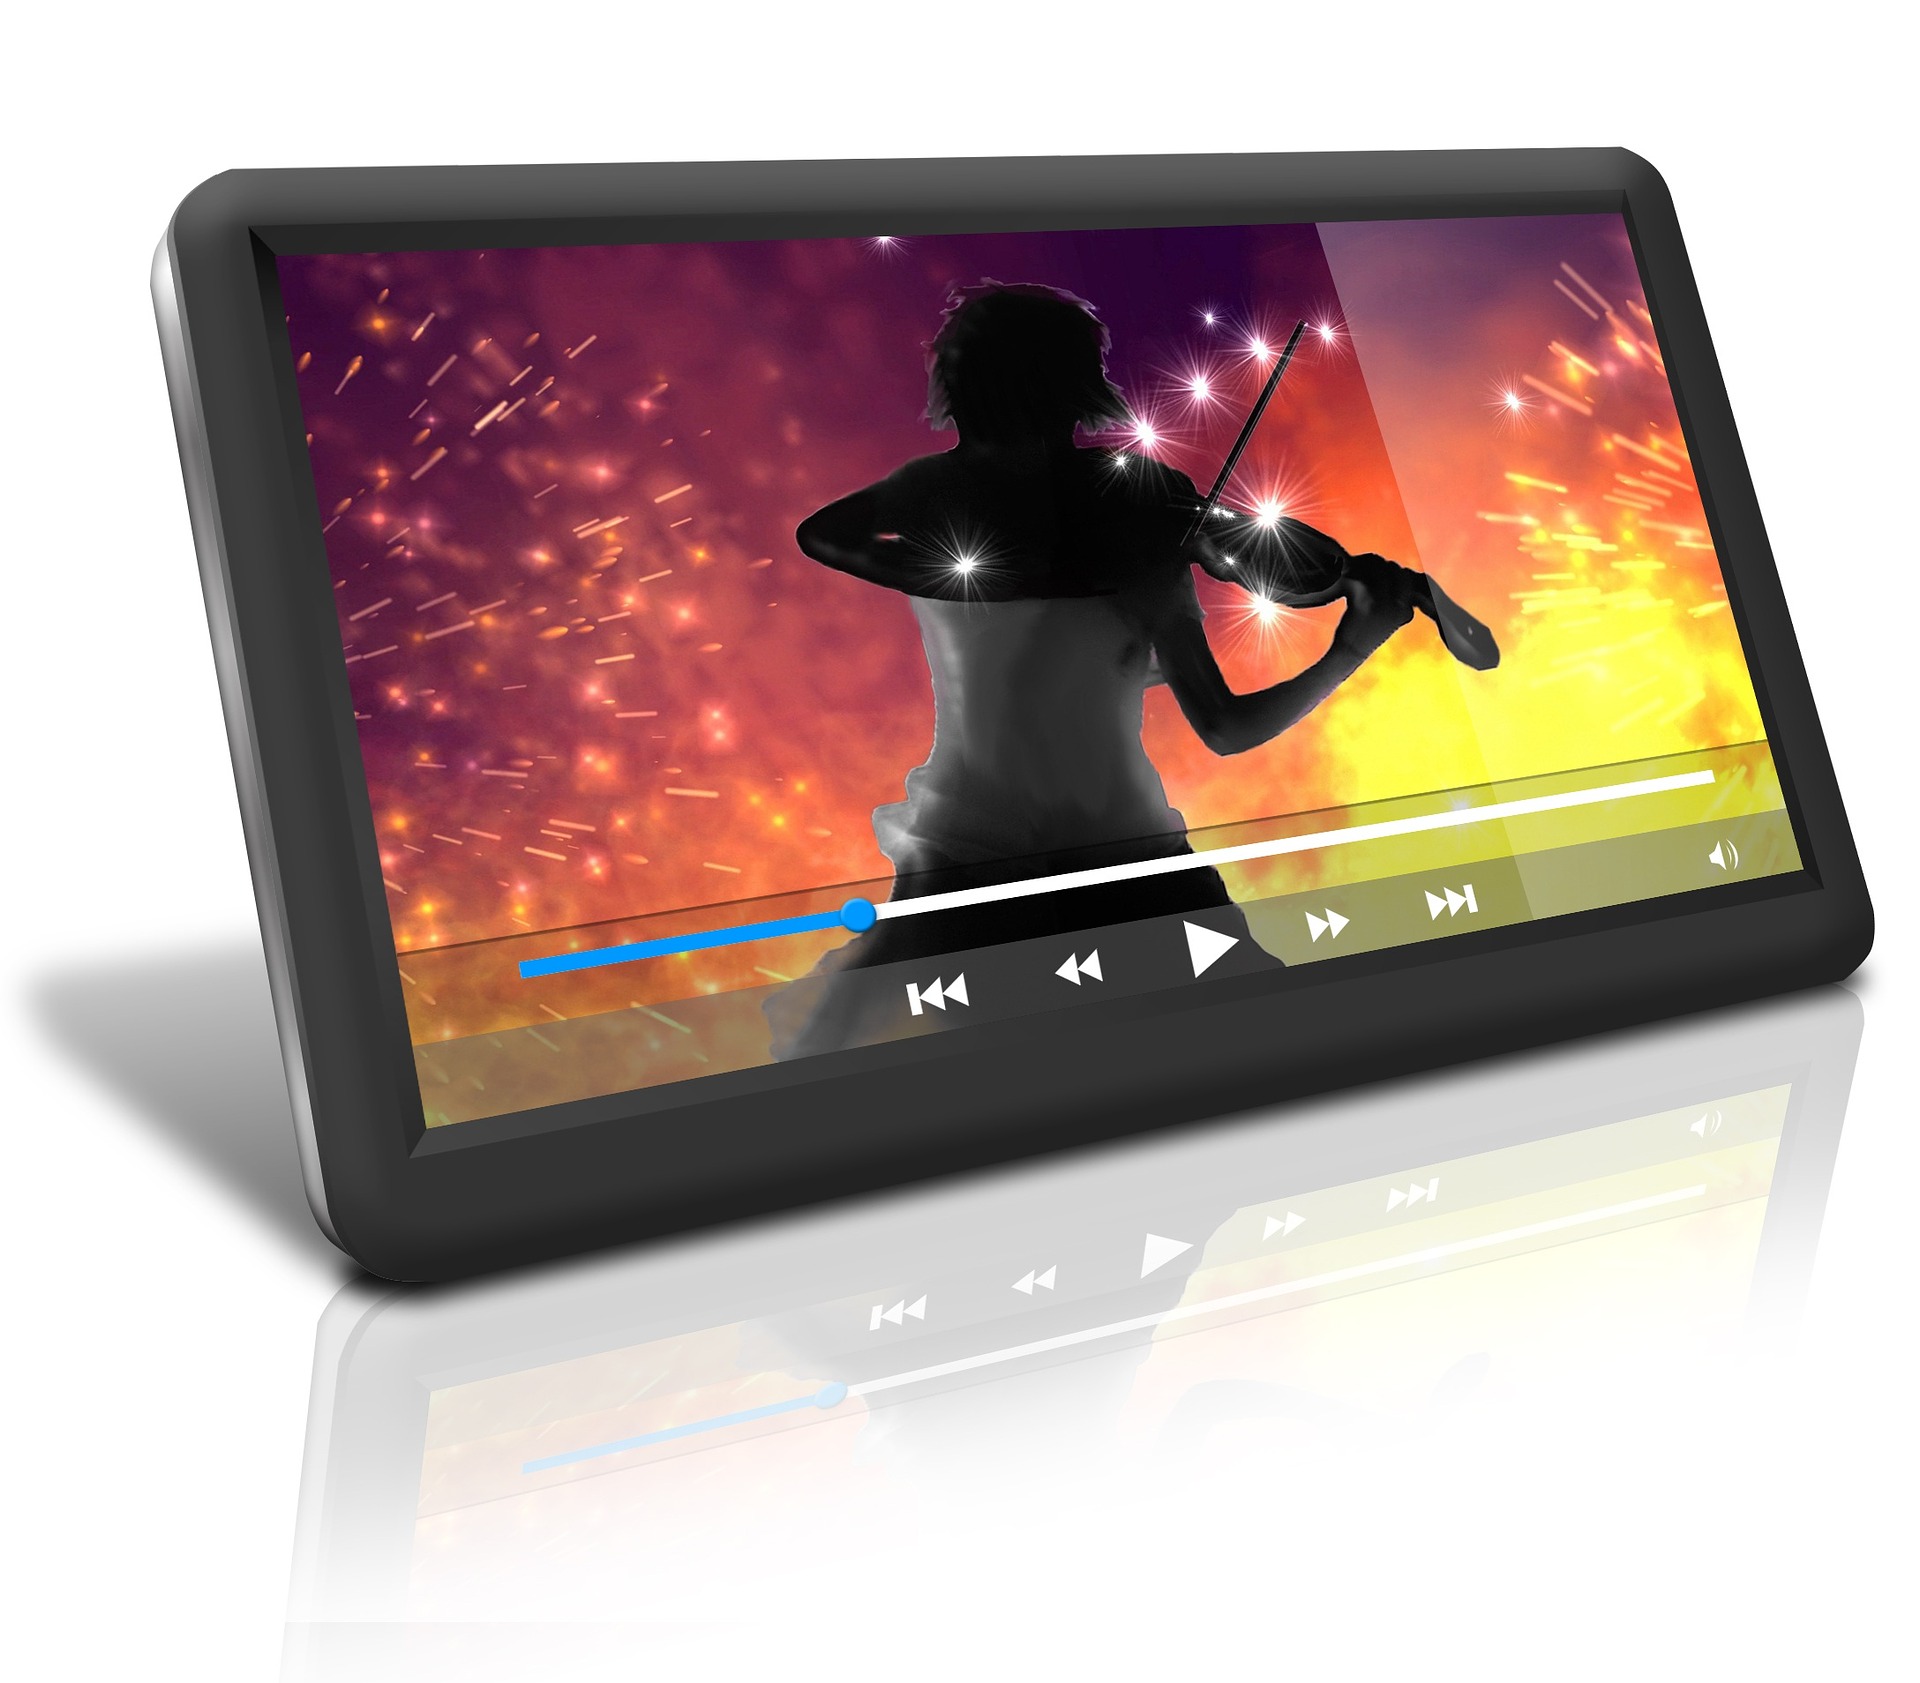 mp4 player download free for windows 10